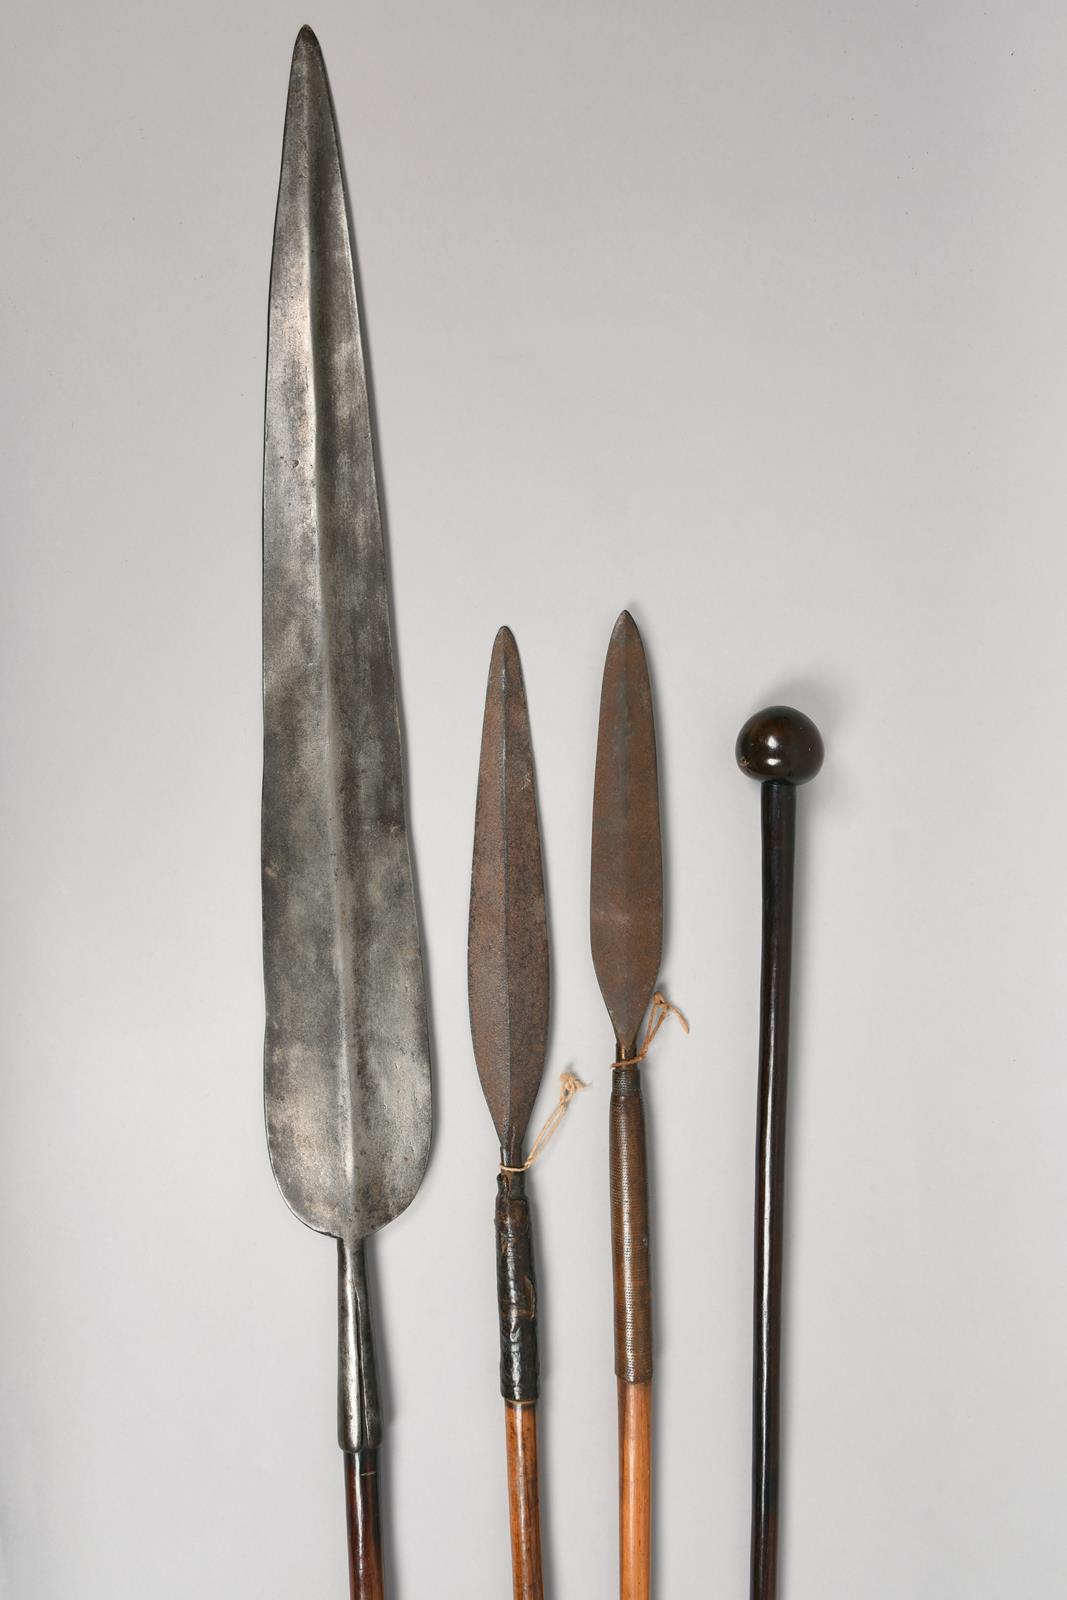 A Zulu shield South Africa cow hide, 69 cm high, two Zulu stabbing spears iklwa, with iron blades - Image 4 of 4